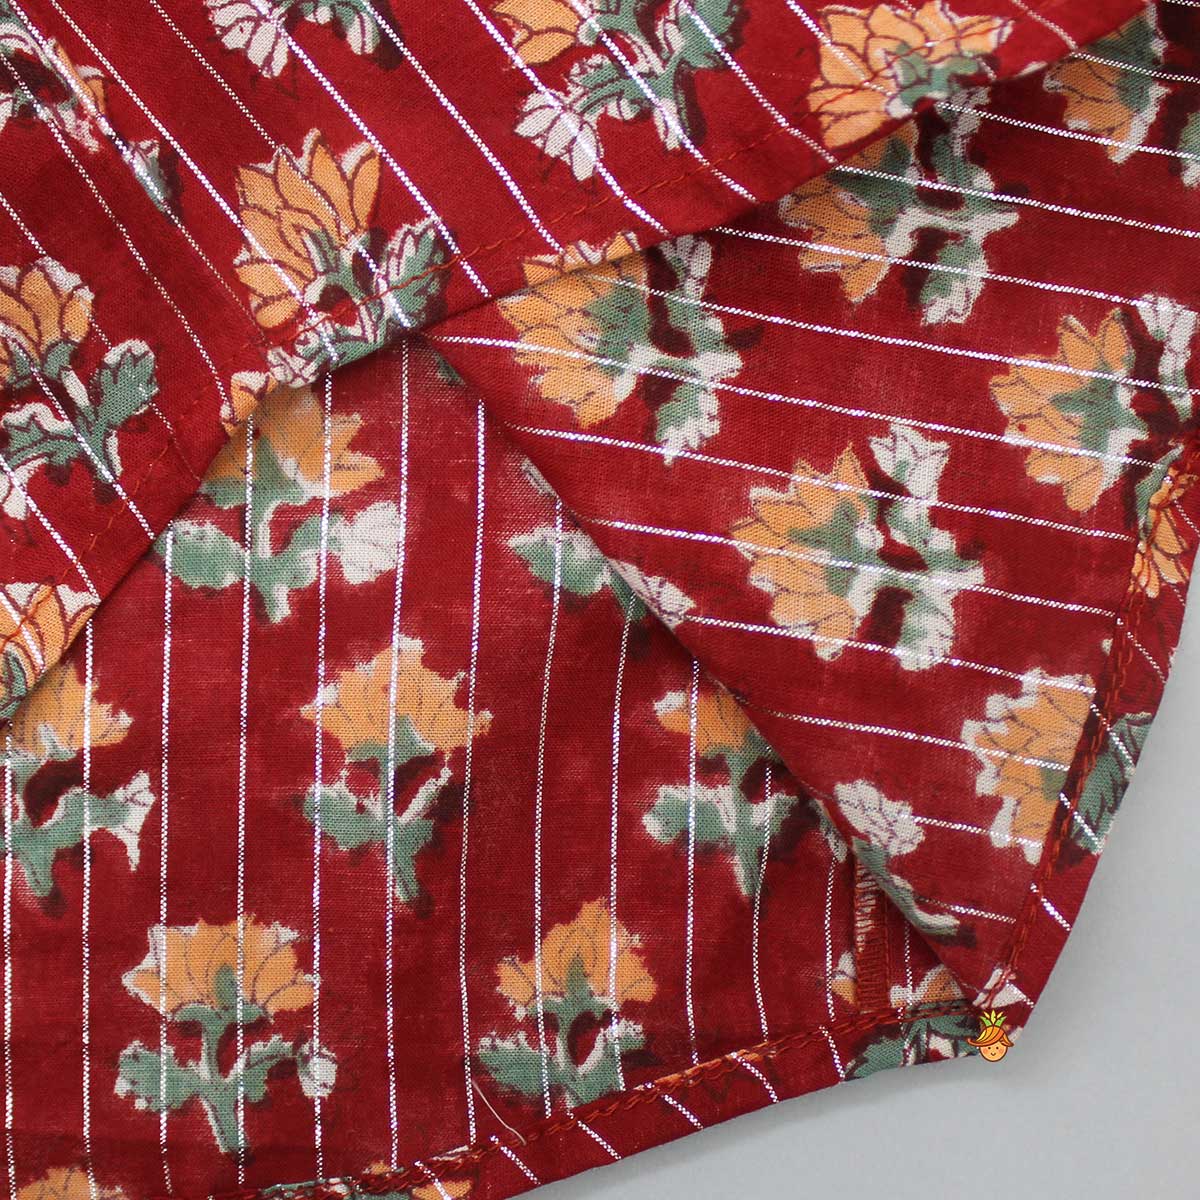 Floral Printed Patch Pocket Detail Red Shirt